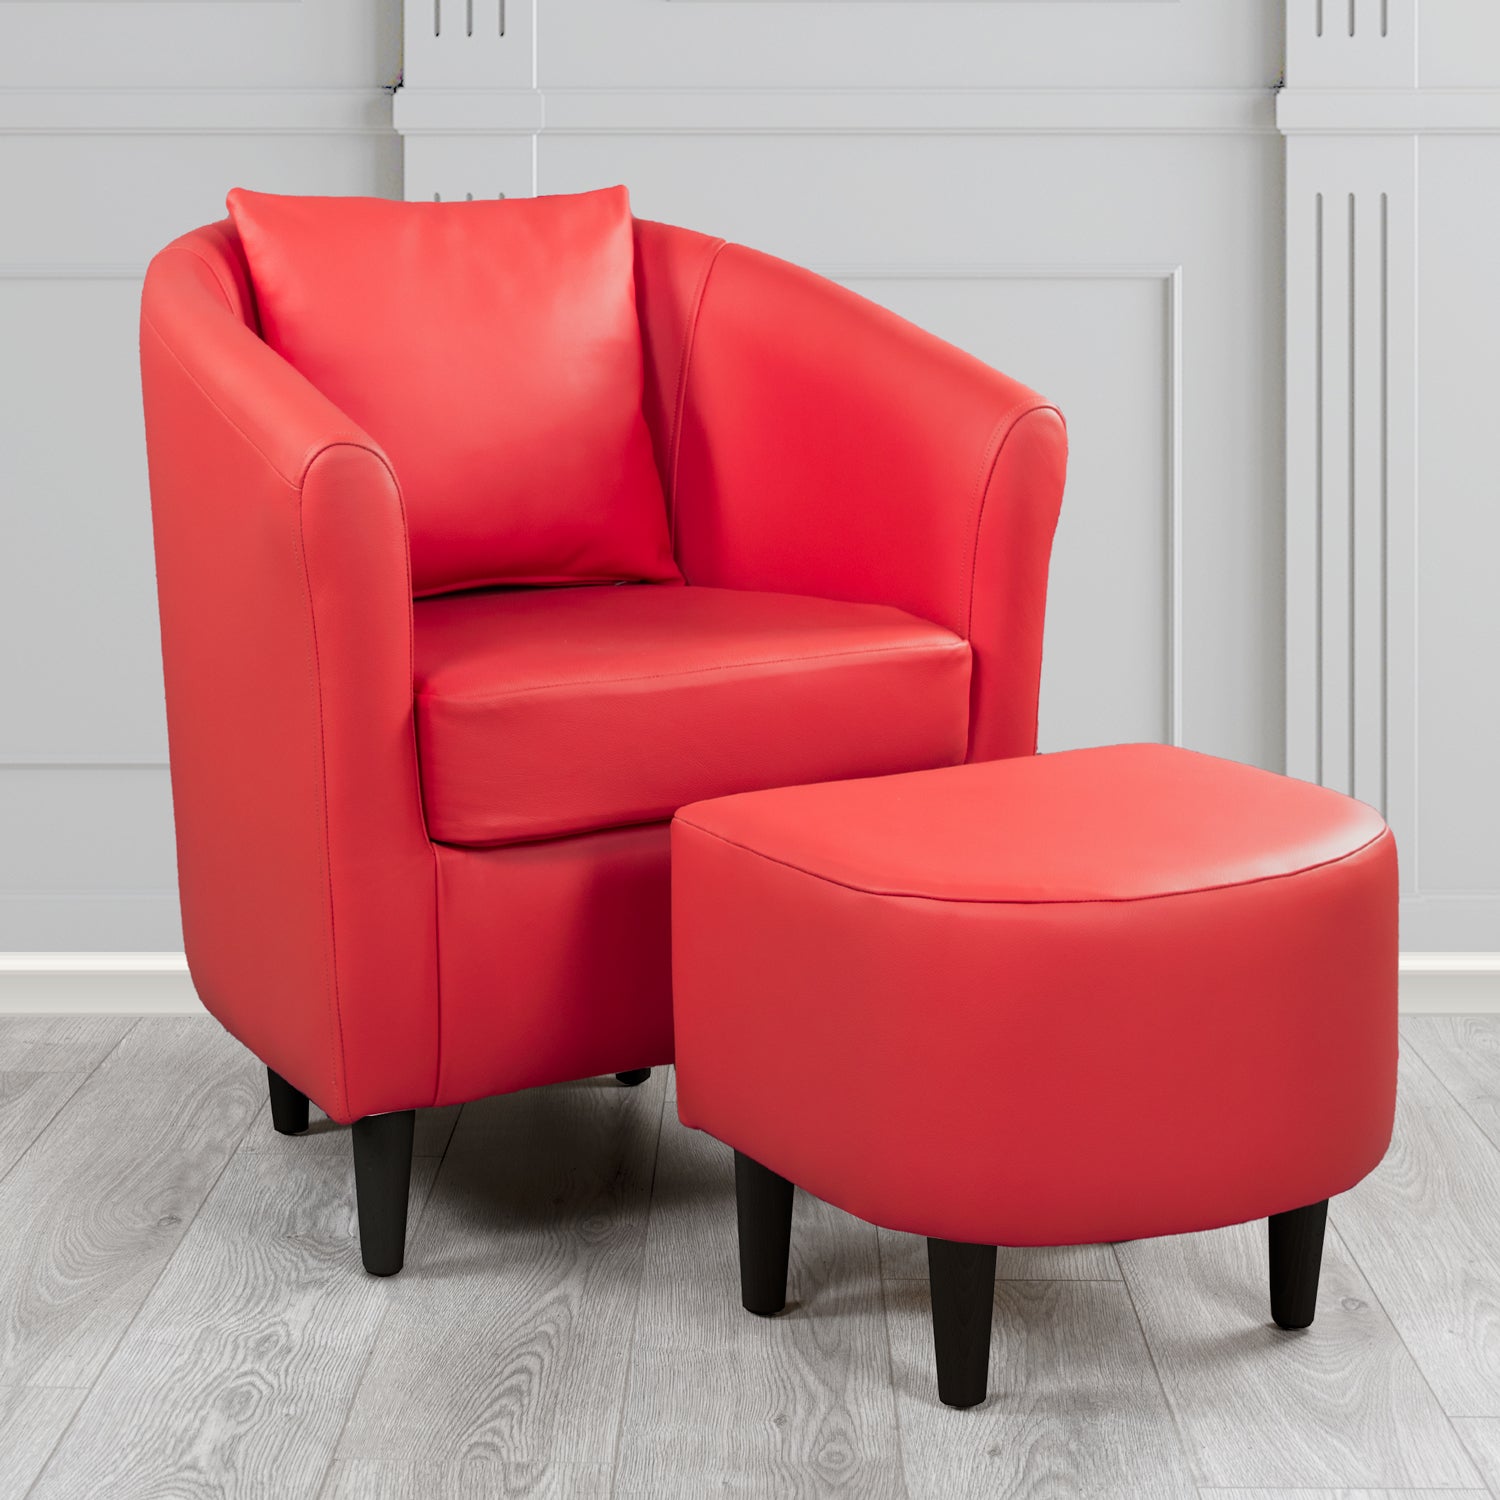 St Tropez Shelly Poppy Crib 5 Genuine Leather Tub Chair & Footstool Set With Scatter Cushion (6619517026346)